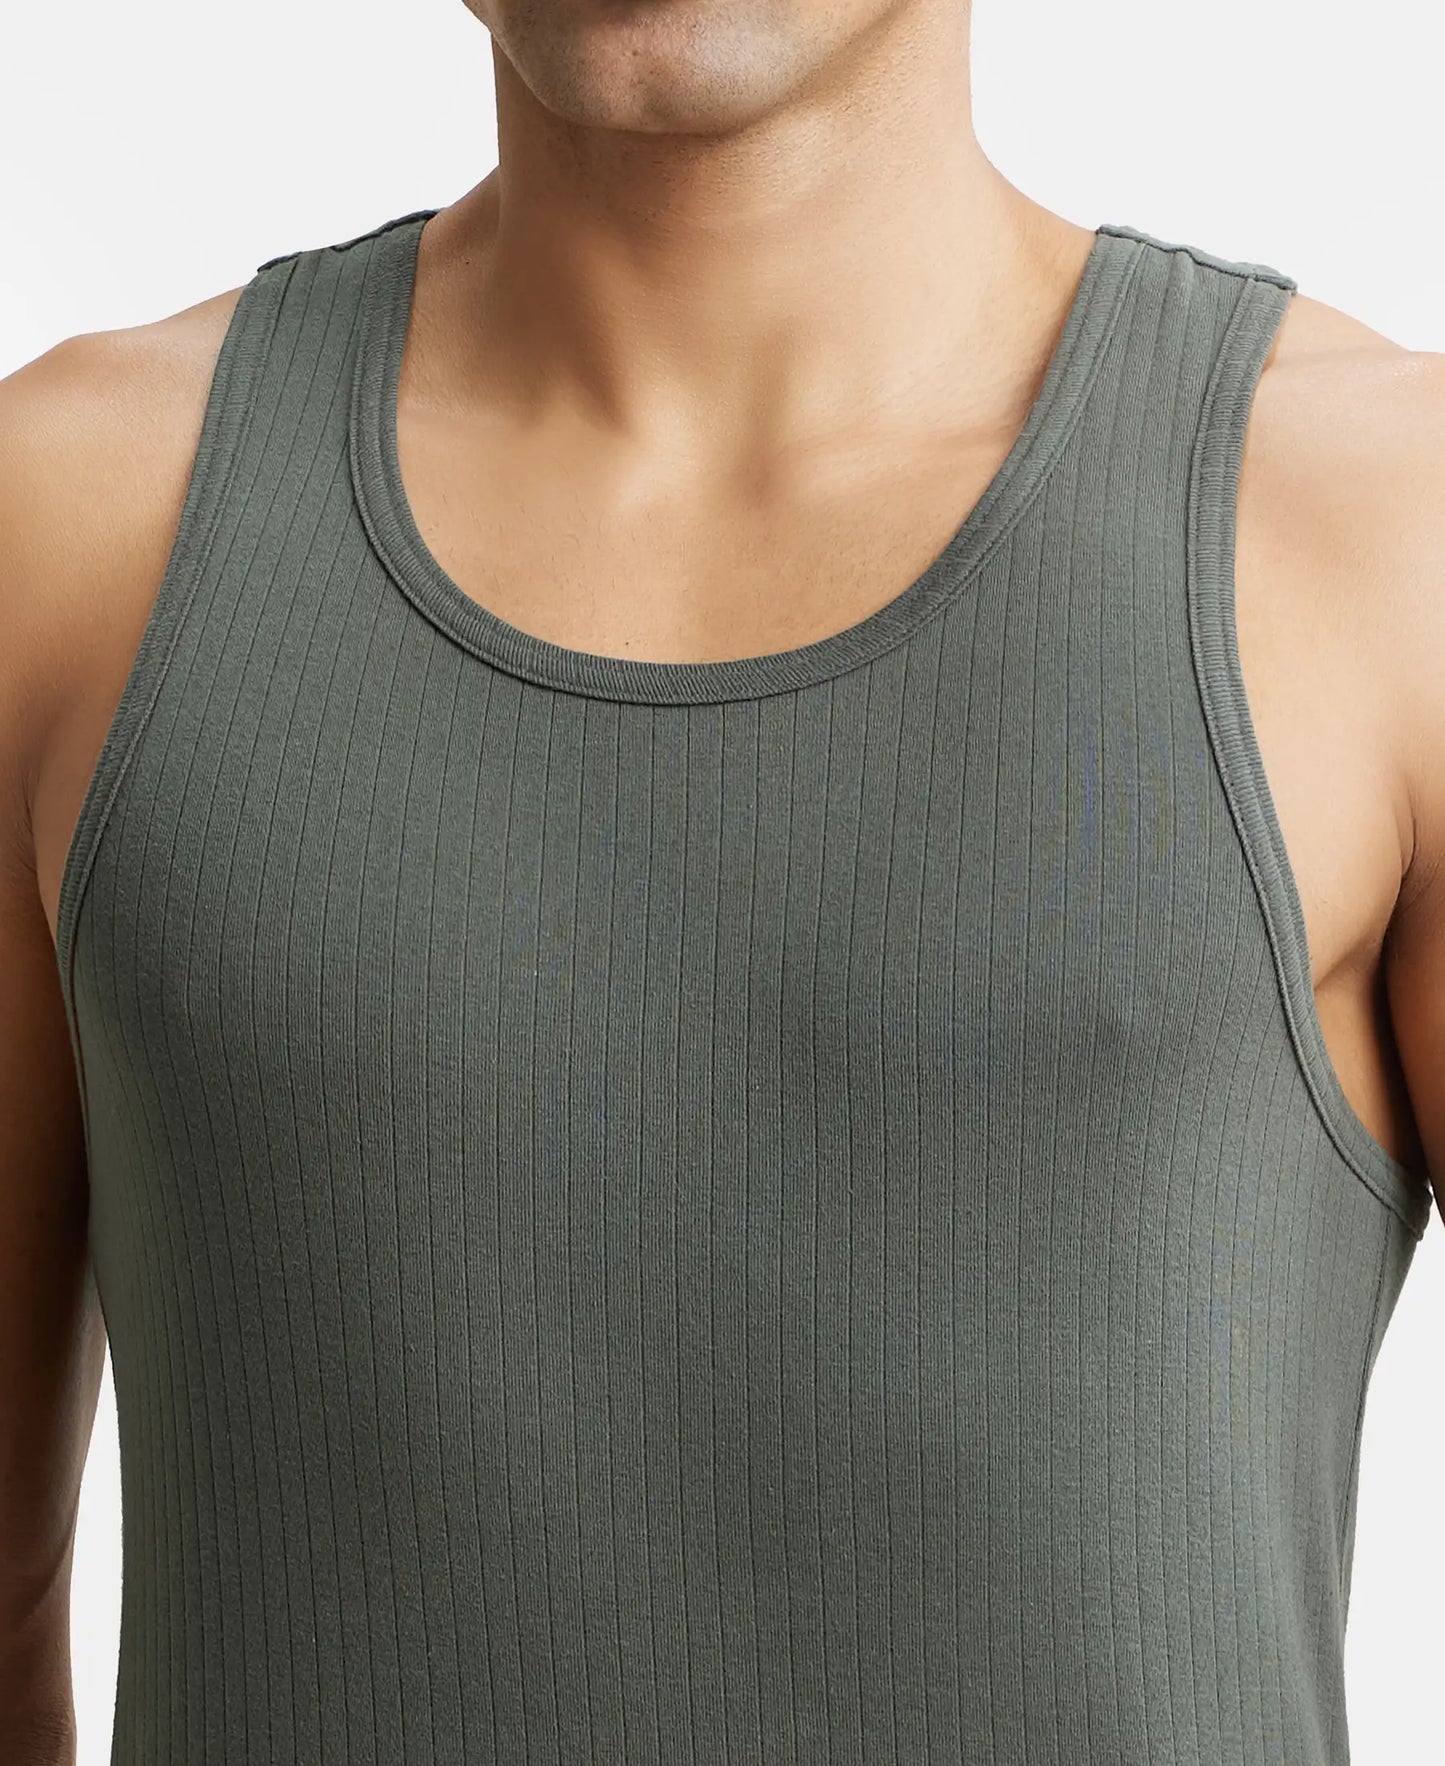 Super Combed Cotton Rib Round Neck with Racer Back Gym Vest - Deep Olive-6